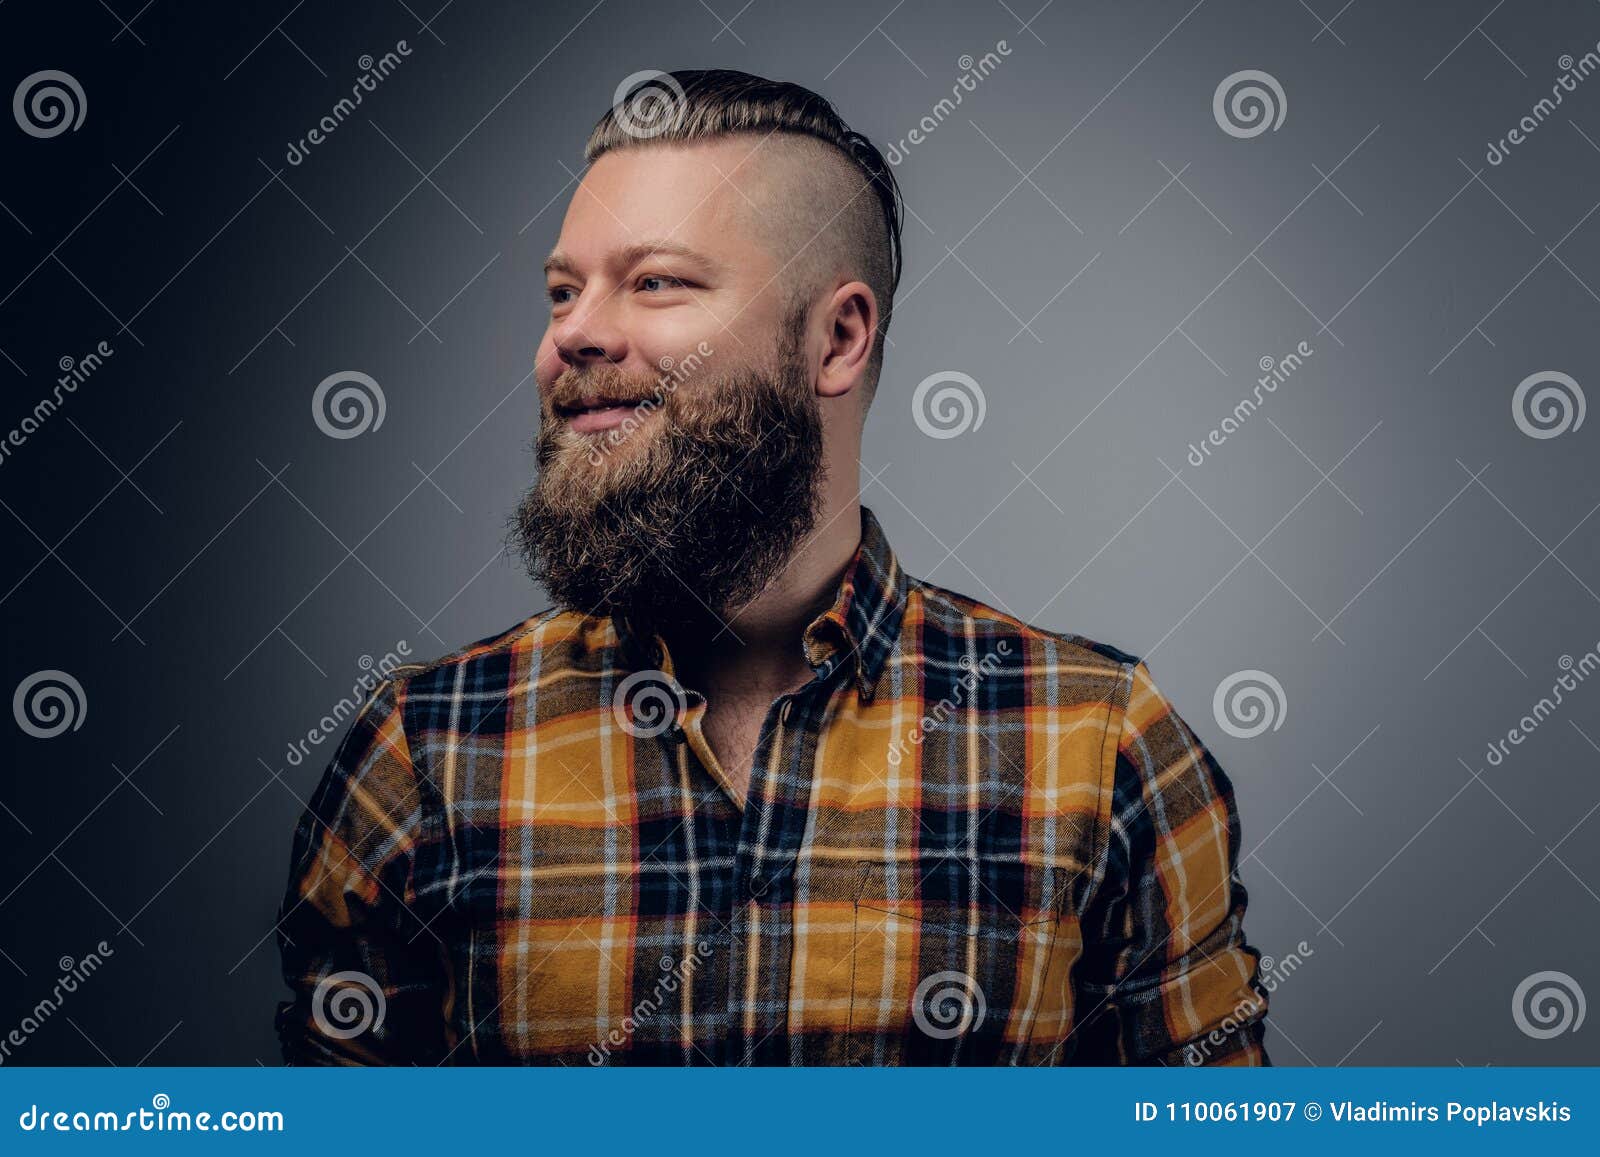 Laughing Bearded Male in Yellow Shirt. Stock Image - Image of confident ...